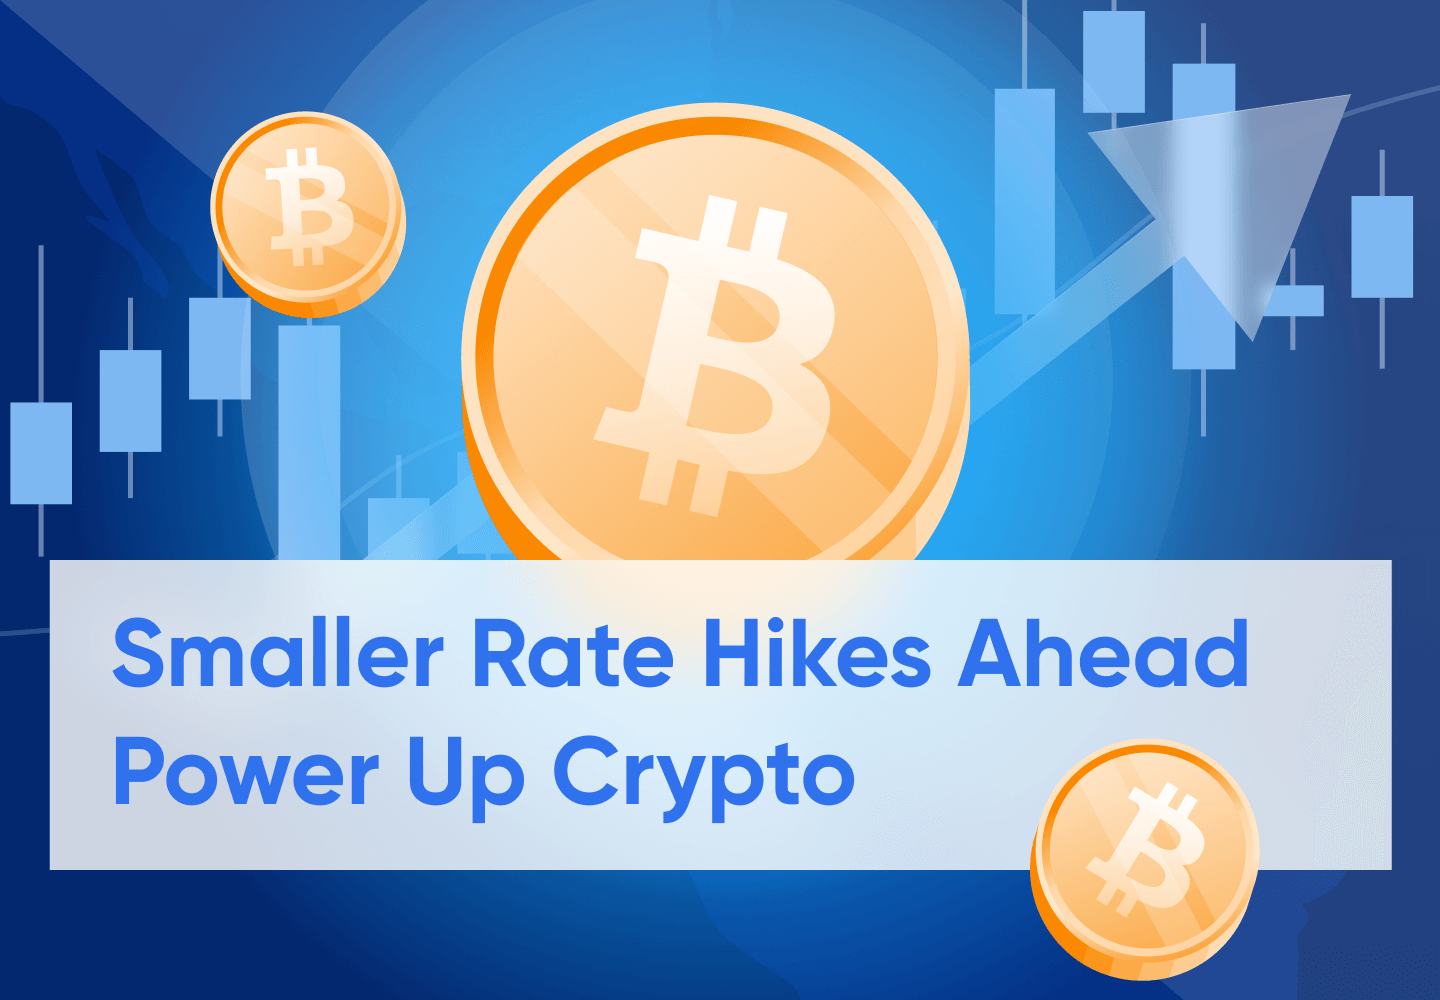 Crypto Rallies After Fed Chair Powell Confirms Smaller Rate Hikes Ahead